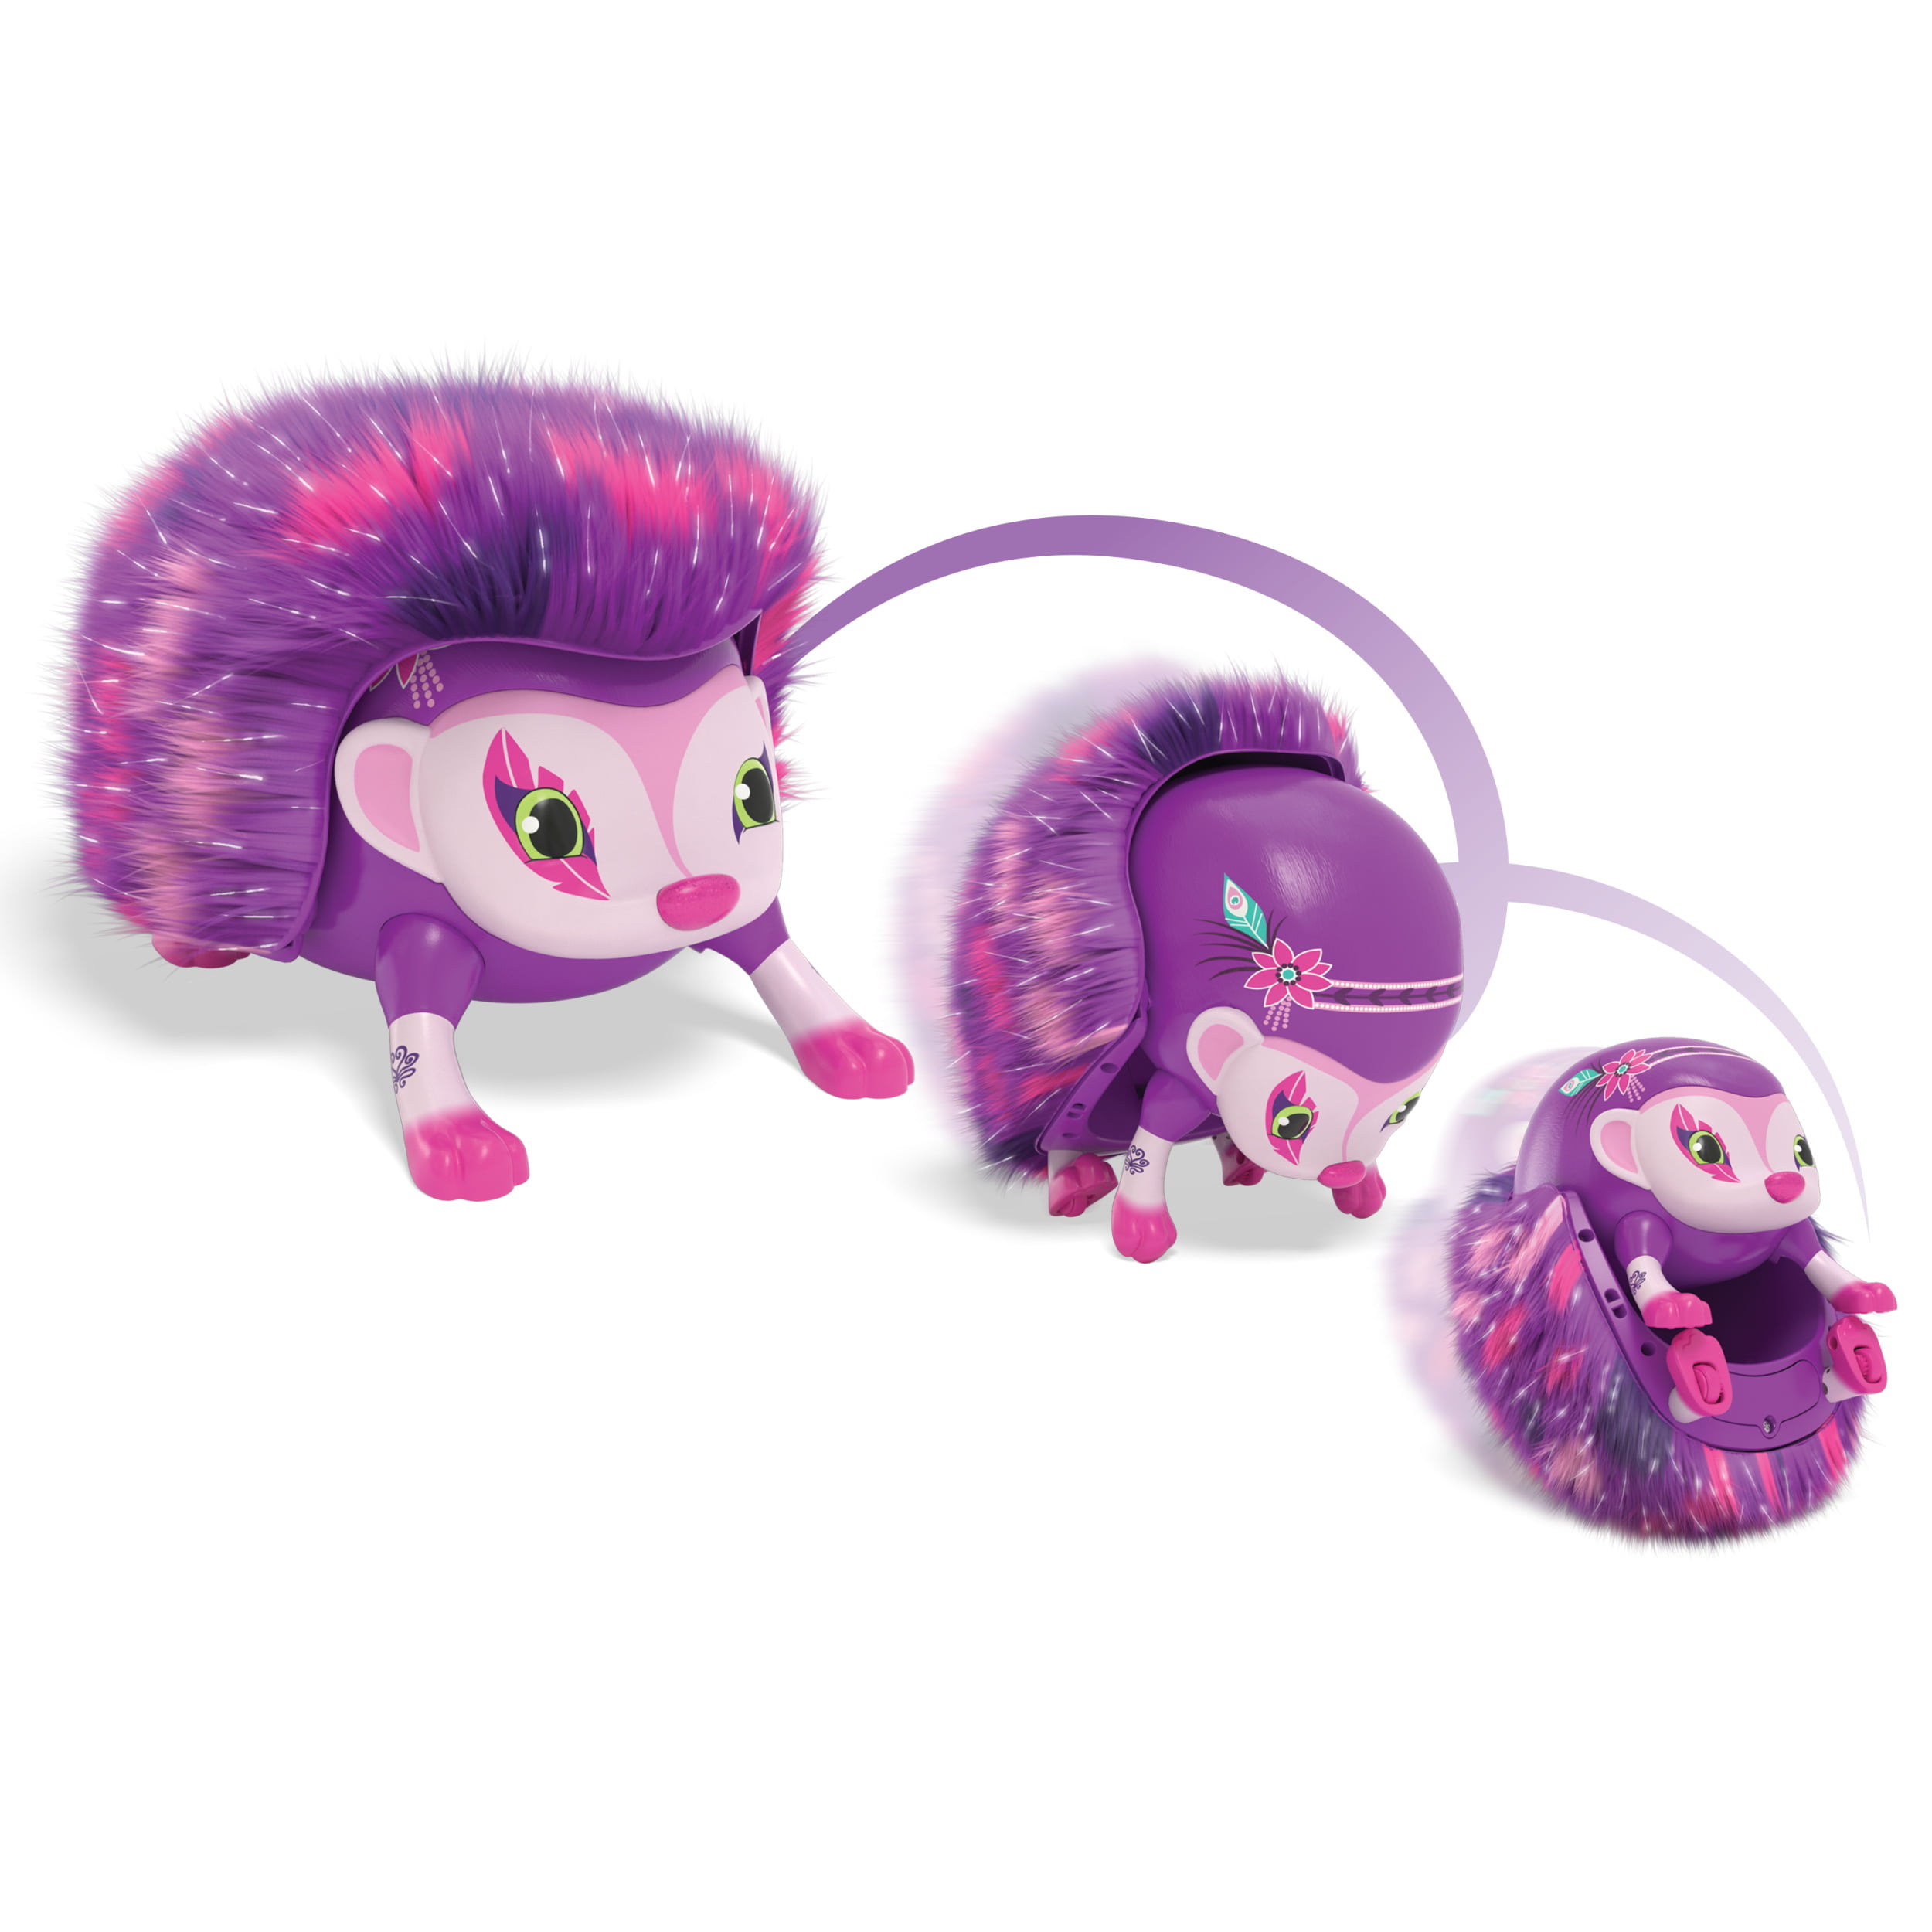 Moves Lights up & Tricks NEW Zoomer Hedgiez Interactive Baby Hedgehog 'Daisy' 